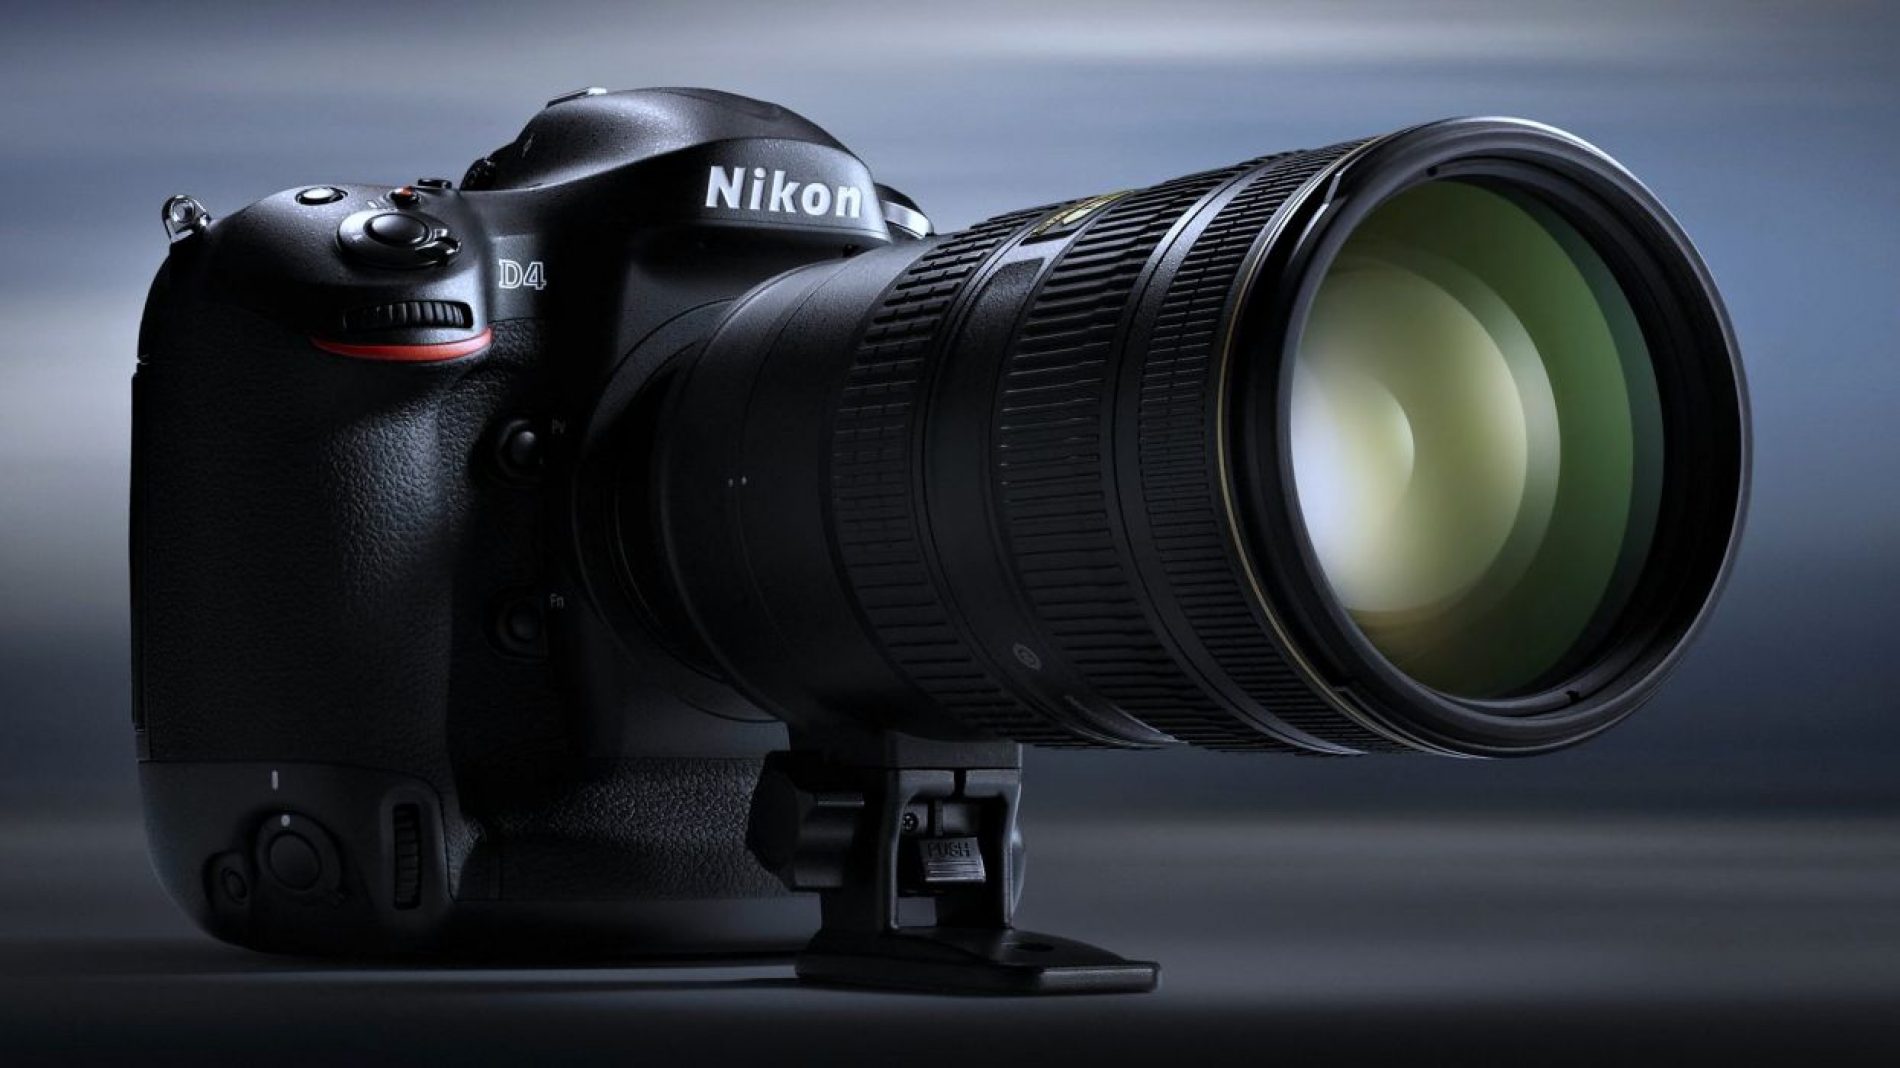 To Upgrade or Not Upgrade from a Nikon D3s to a New Nikon D4? That is the Question!